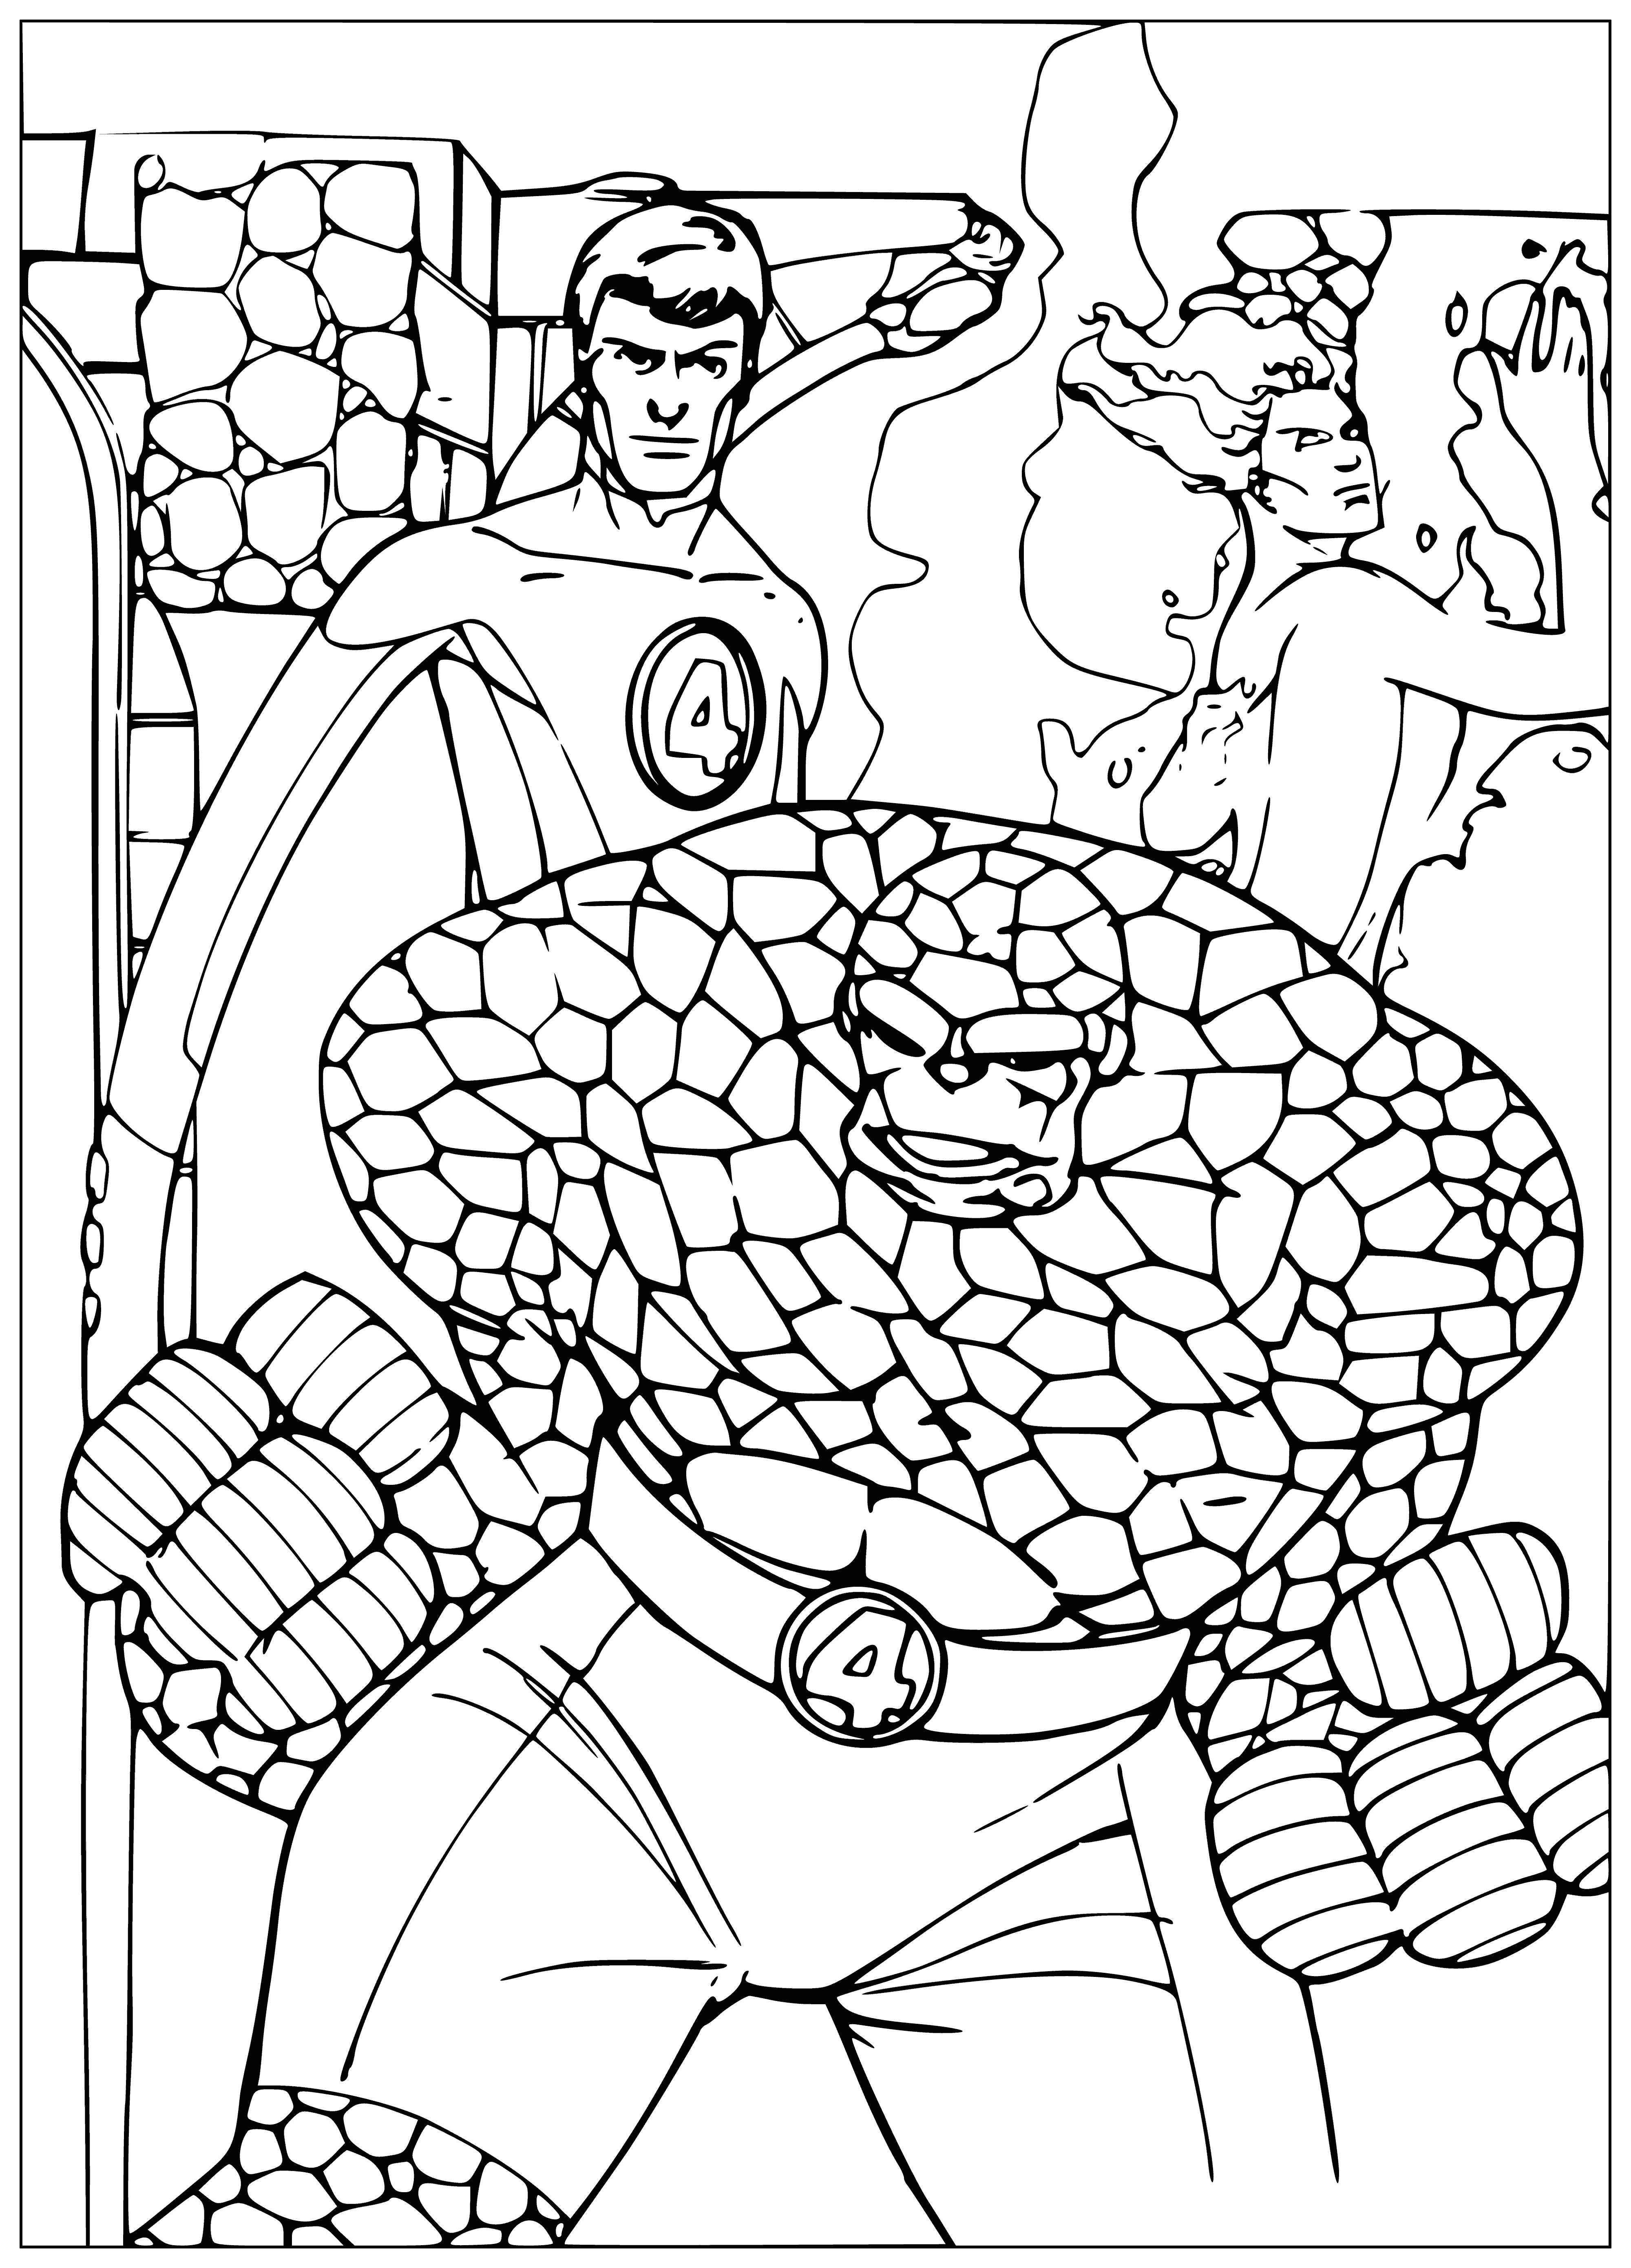 Heroes coloring page